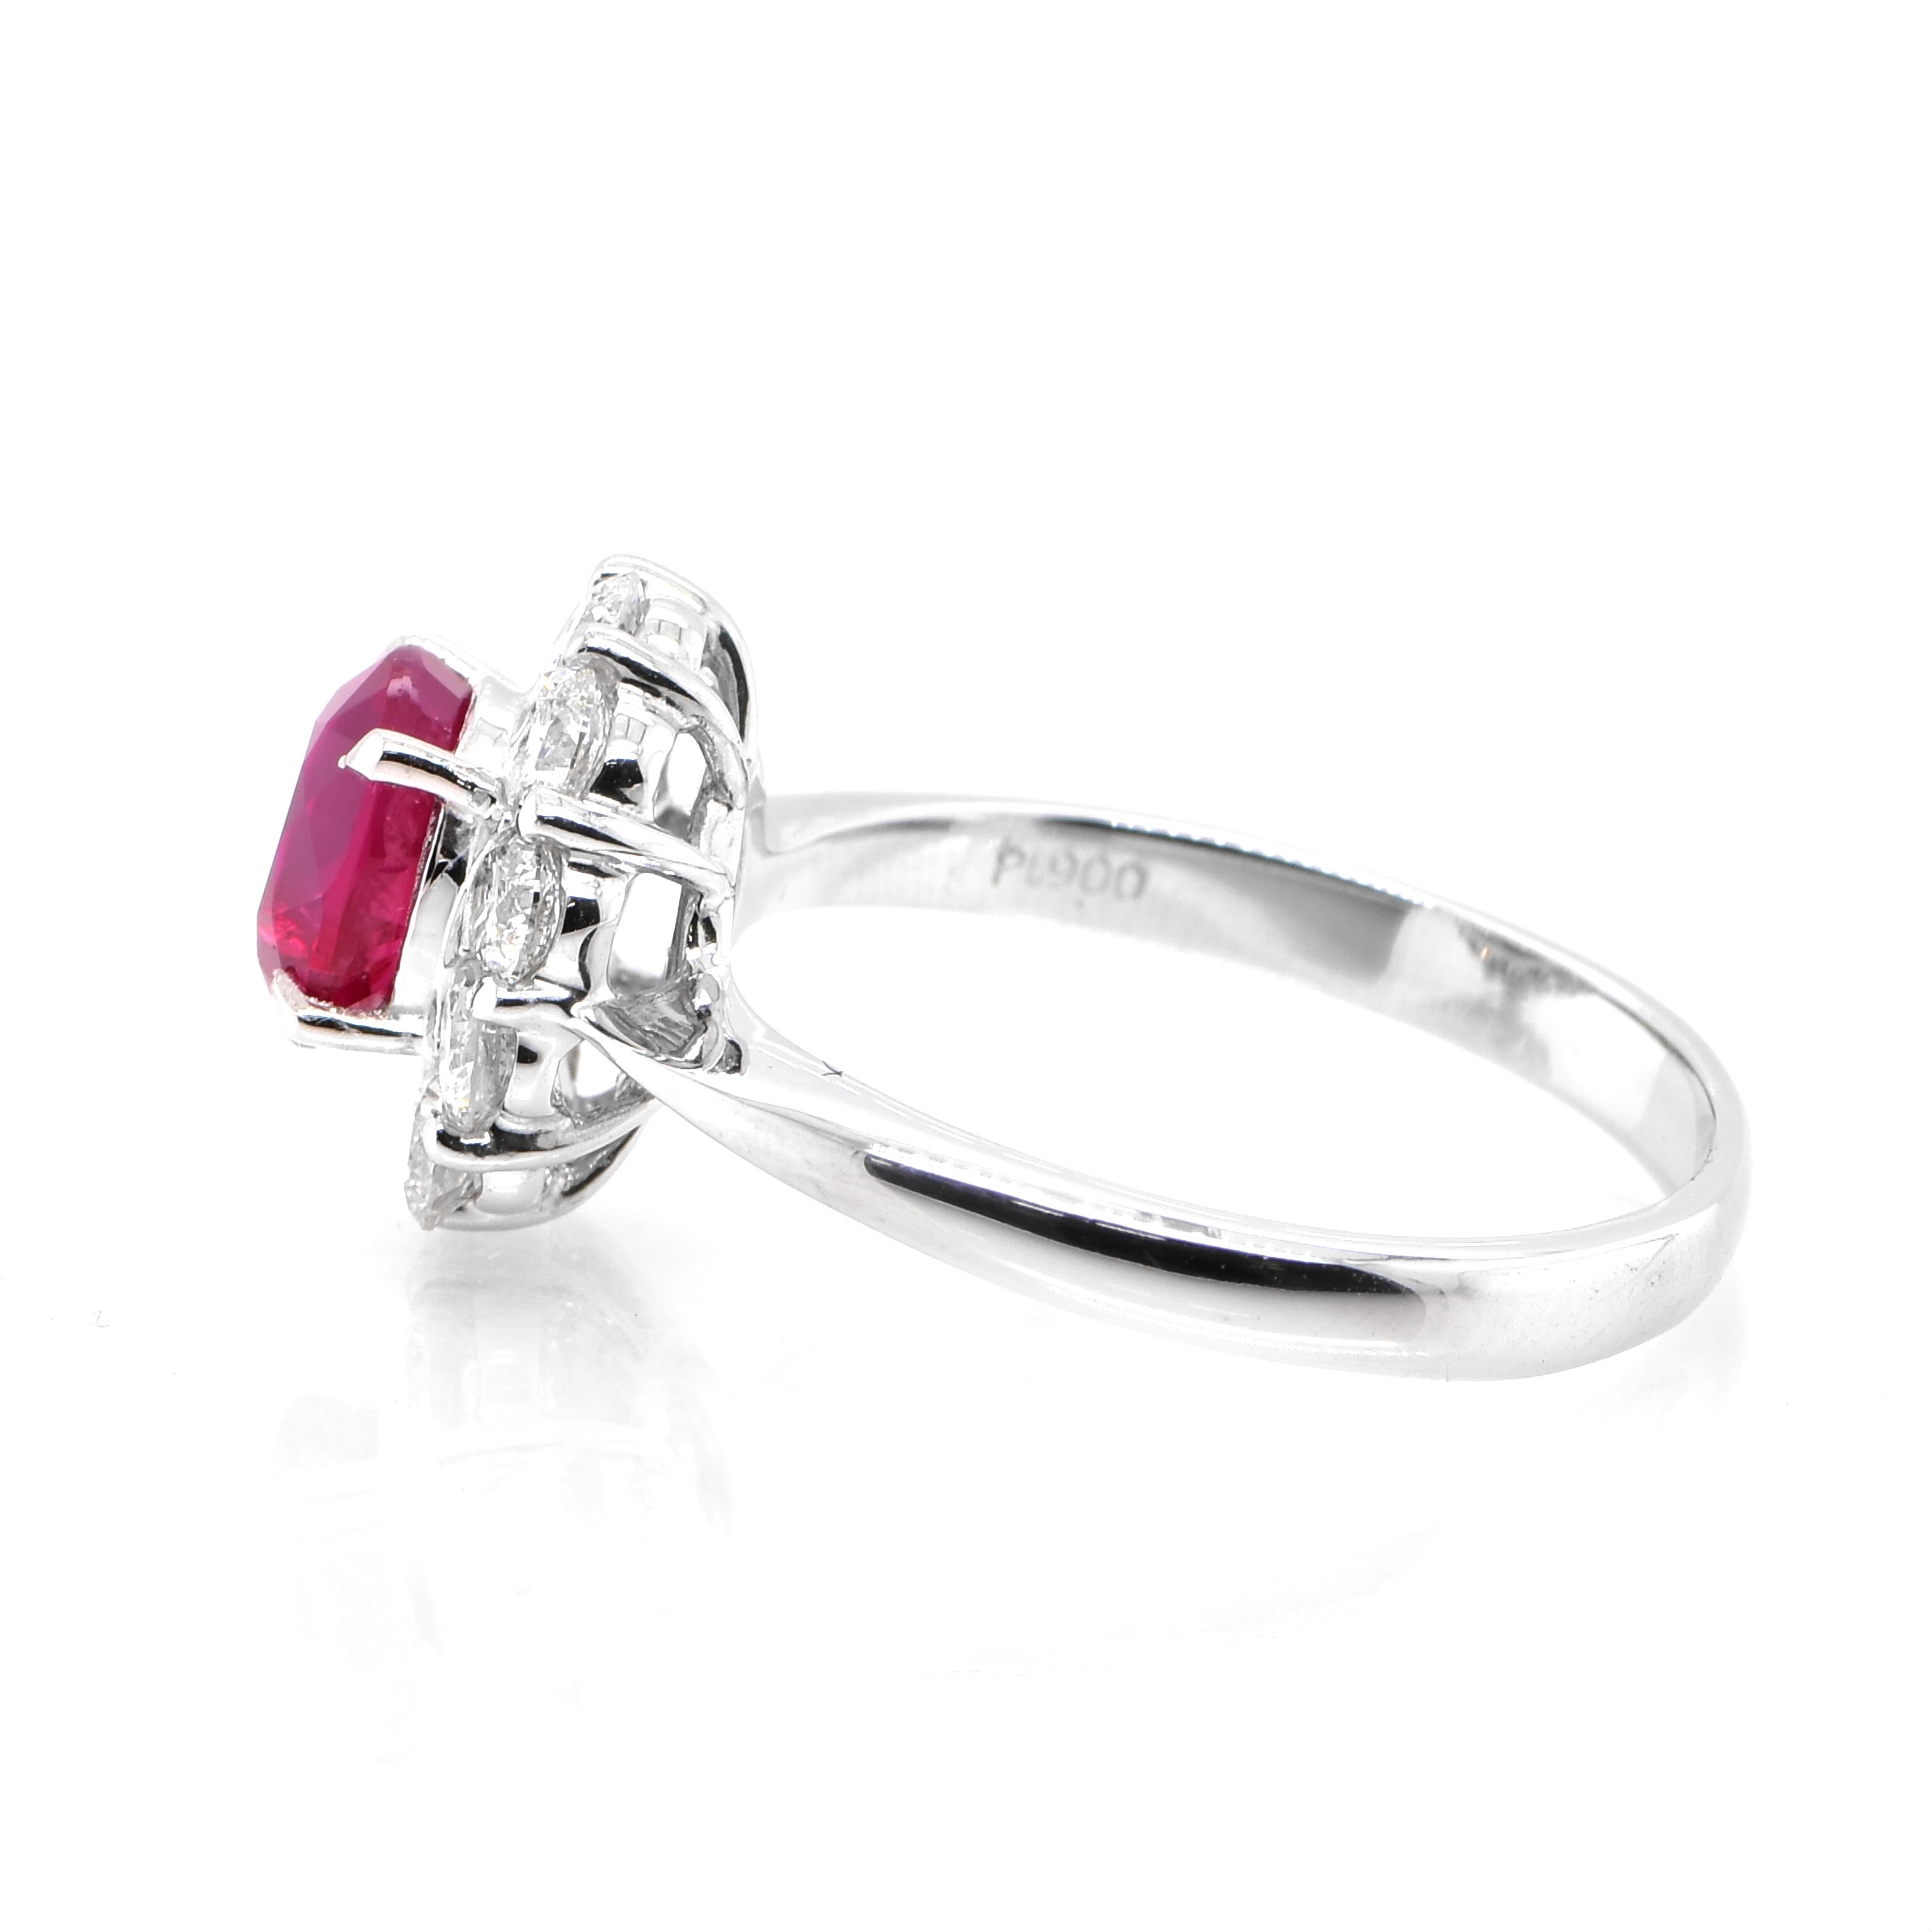 Oval Cut AIGS Certified 1.39 Carat Untreated Ruby and Diamond Ring Made in Platinum For Sale